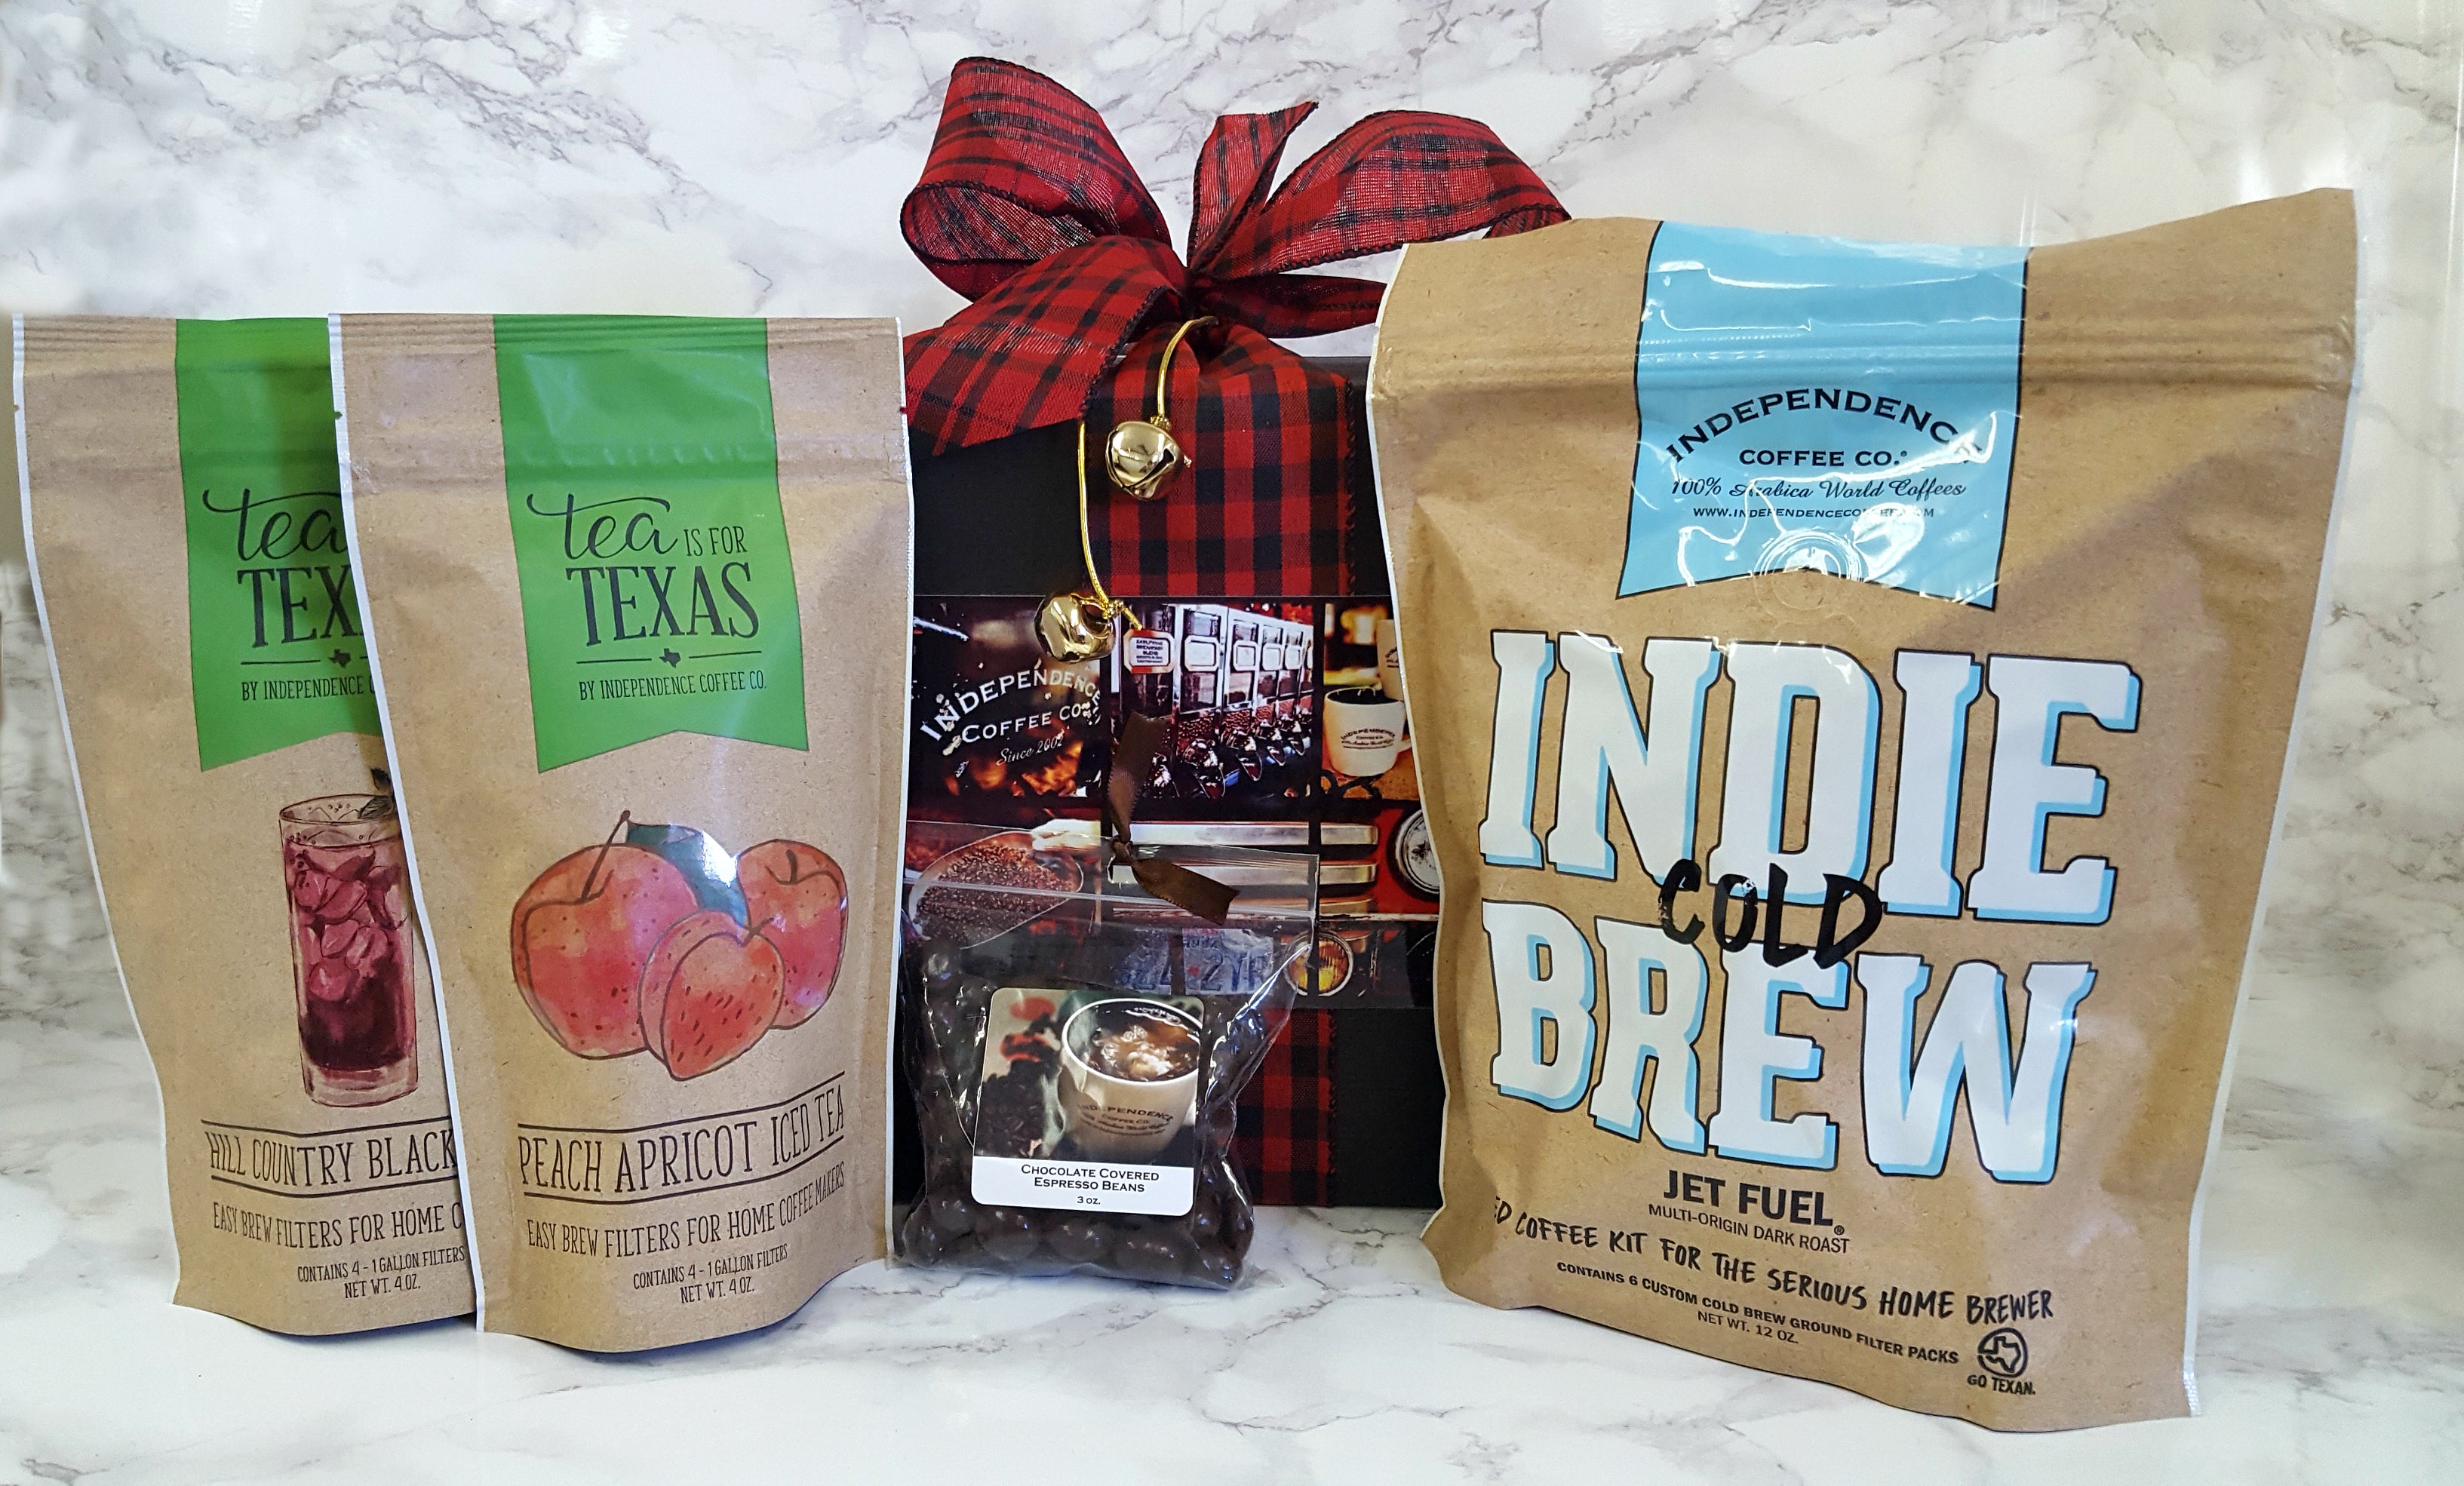 Indie Cold Brew Iced Coffee Kit - Independence Coffee Co.